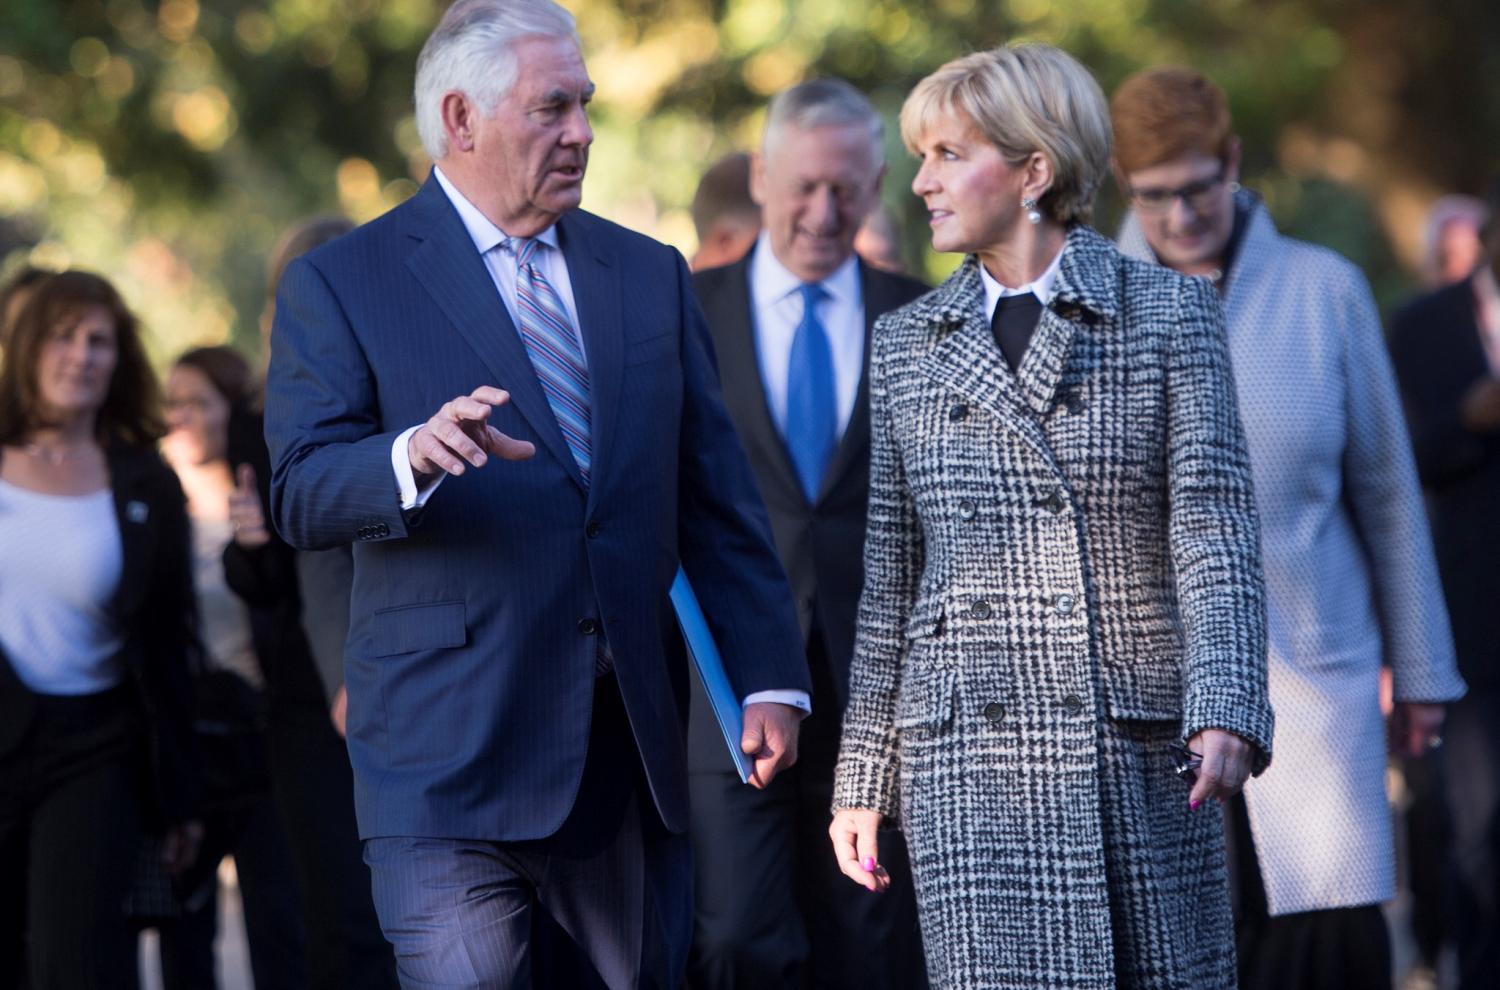 Foreign Minister Julie Bishop with US Secreaty of State Rex Tillerson at AUSMIN, June 2017. (Flickr/Chairman of the Joint Chiefs)